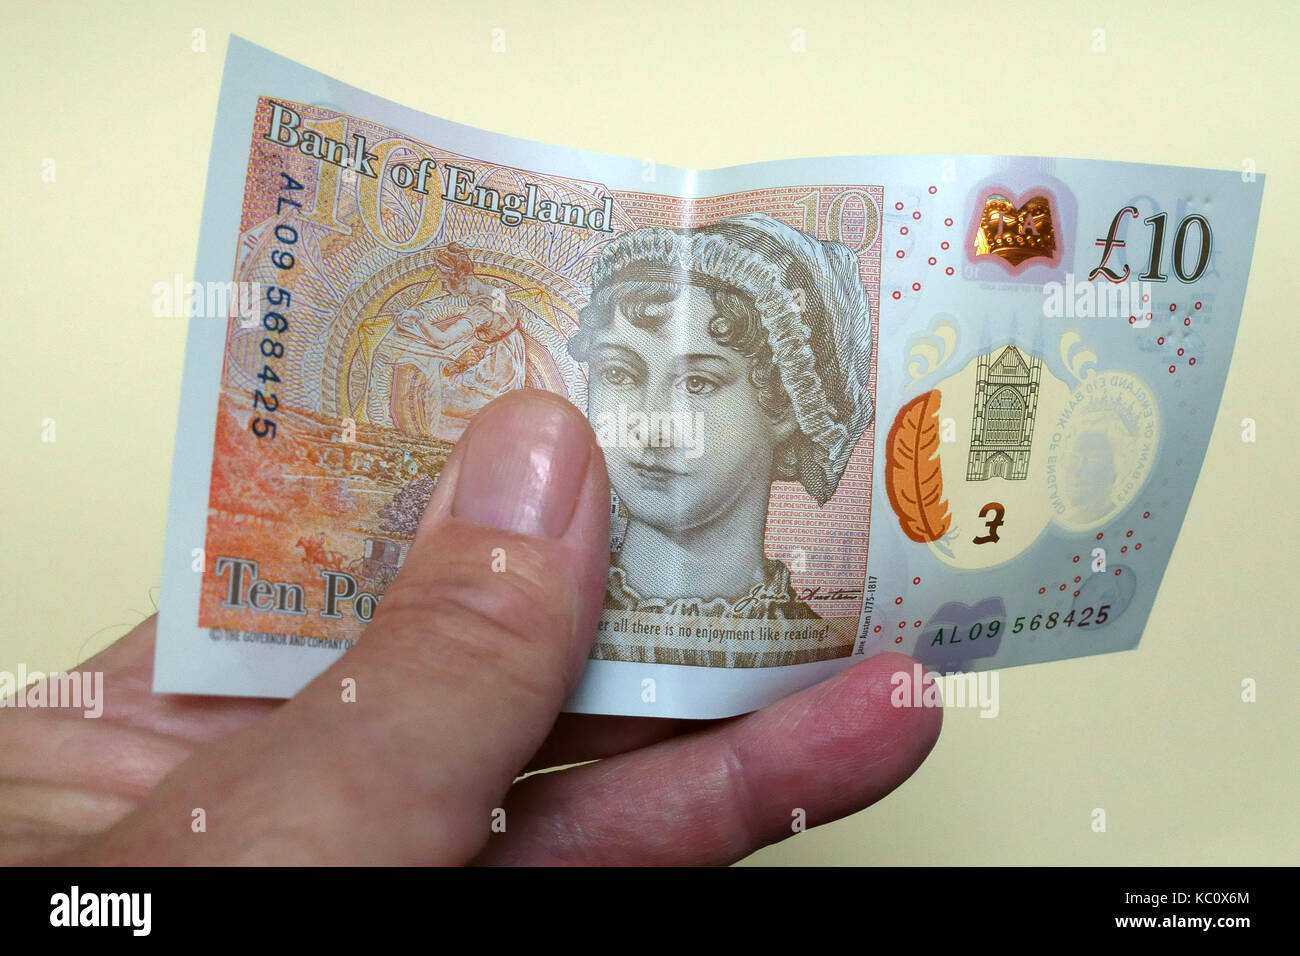 New polymer £10 banknote introduced in September 2017 Stock Photo